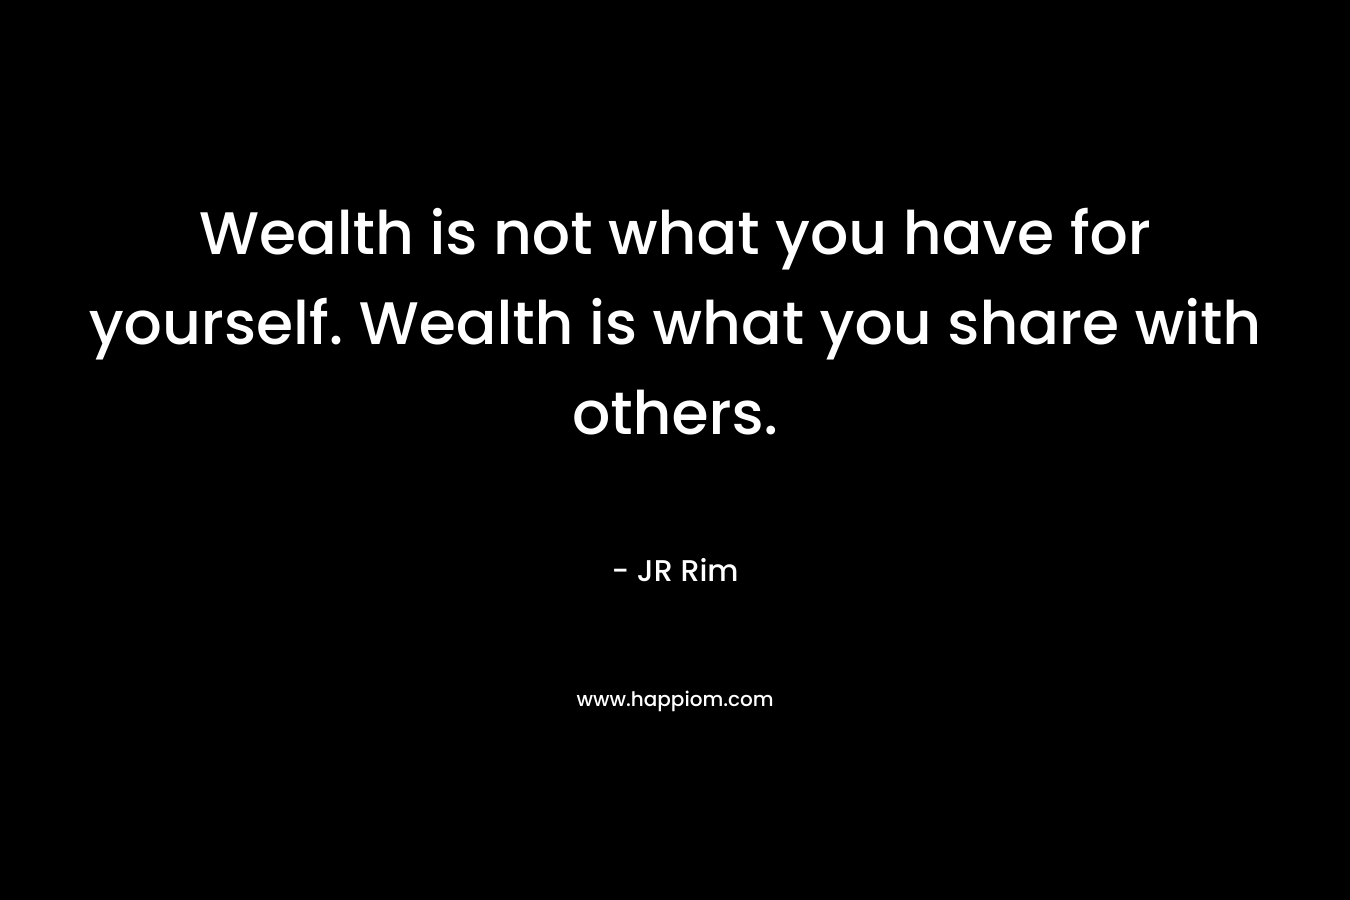 Wealth is not what you have for yourself. Wealth is what you share with others.